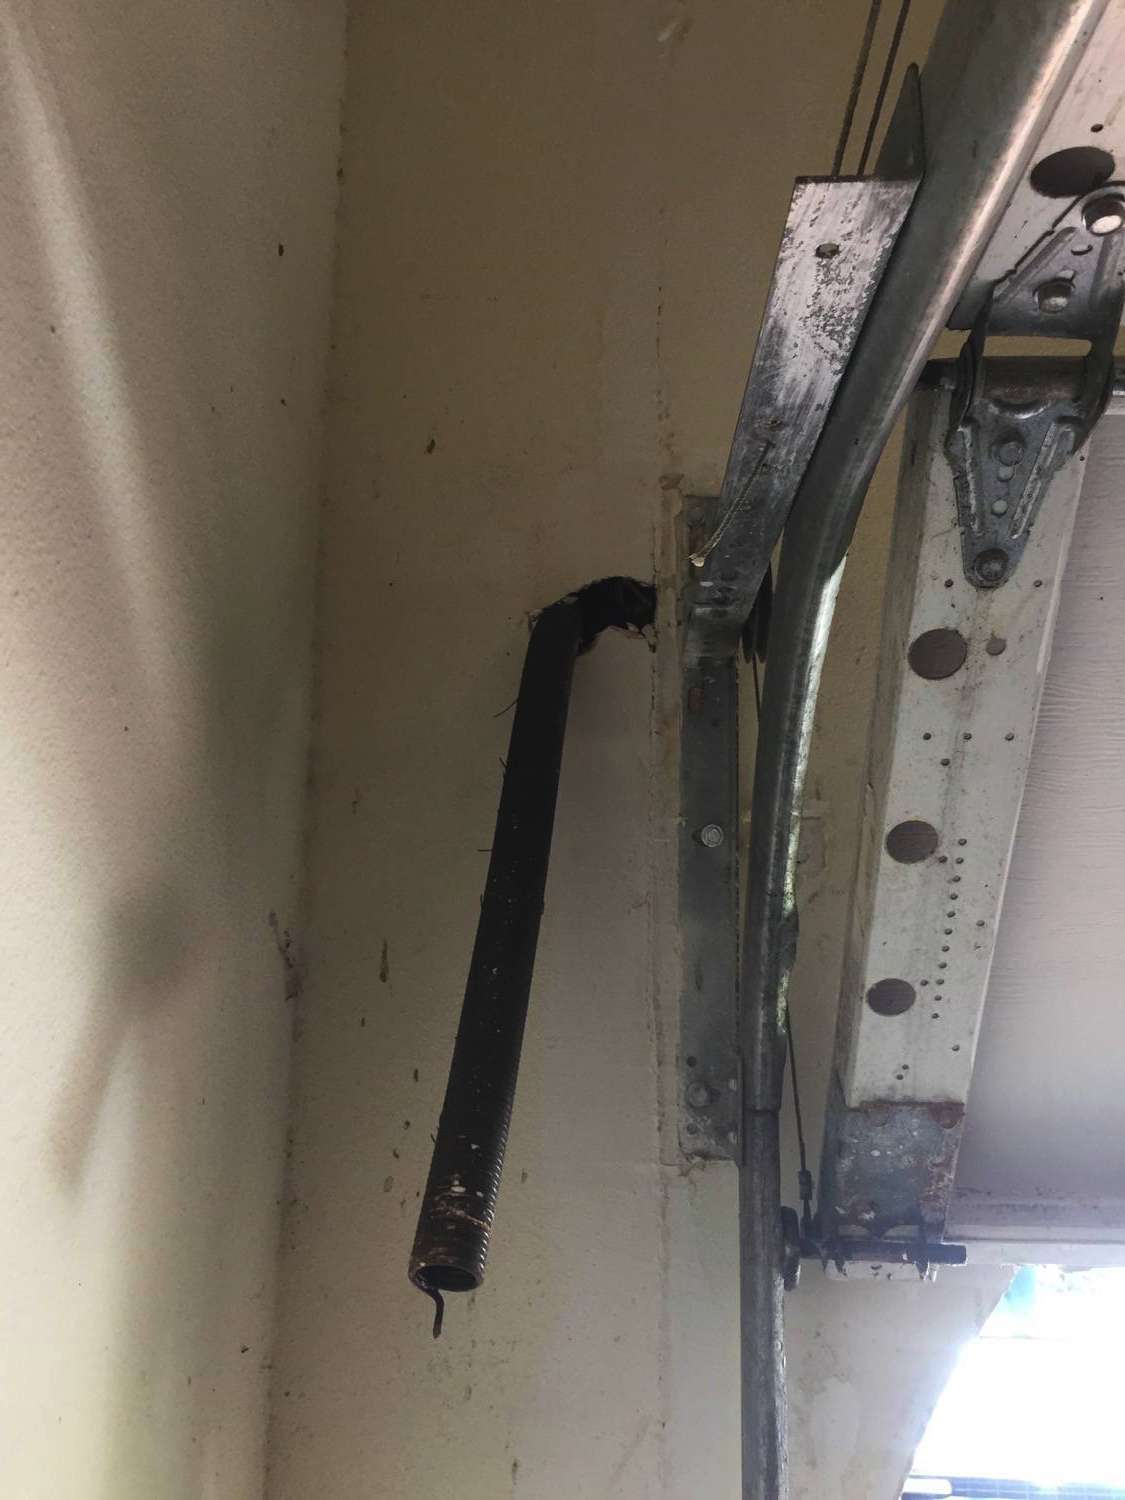 Garage door extension spring sticking out of the sheetrock. The spring broke and it knocked a hole in the wall.